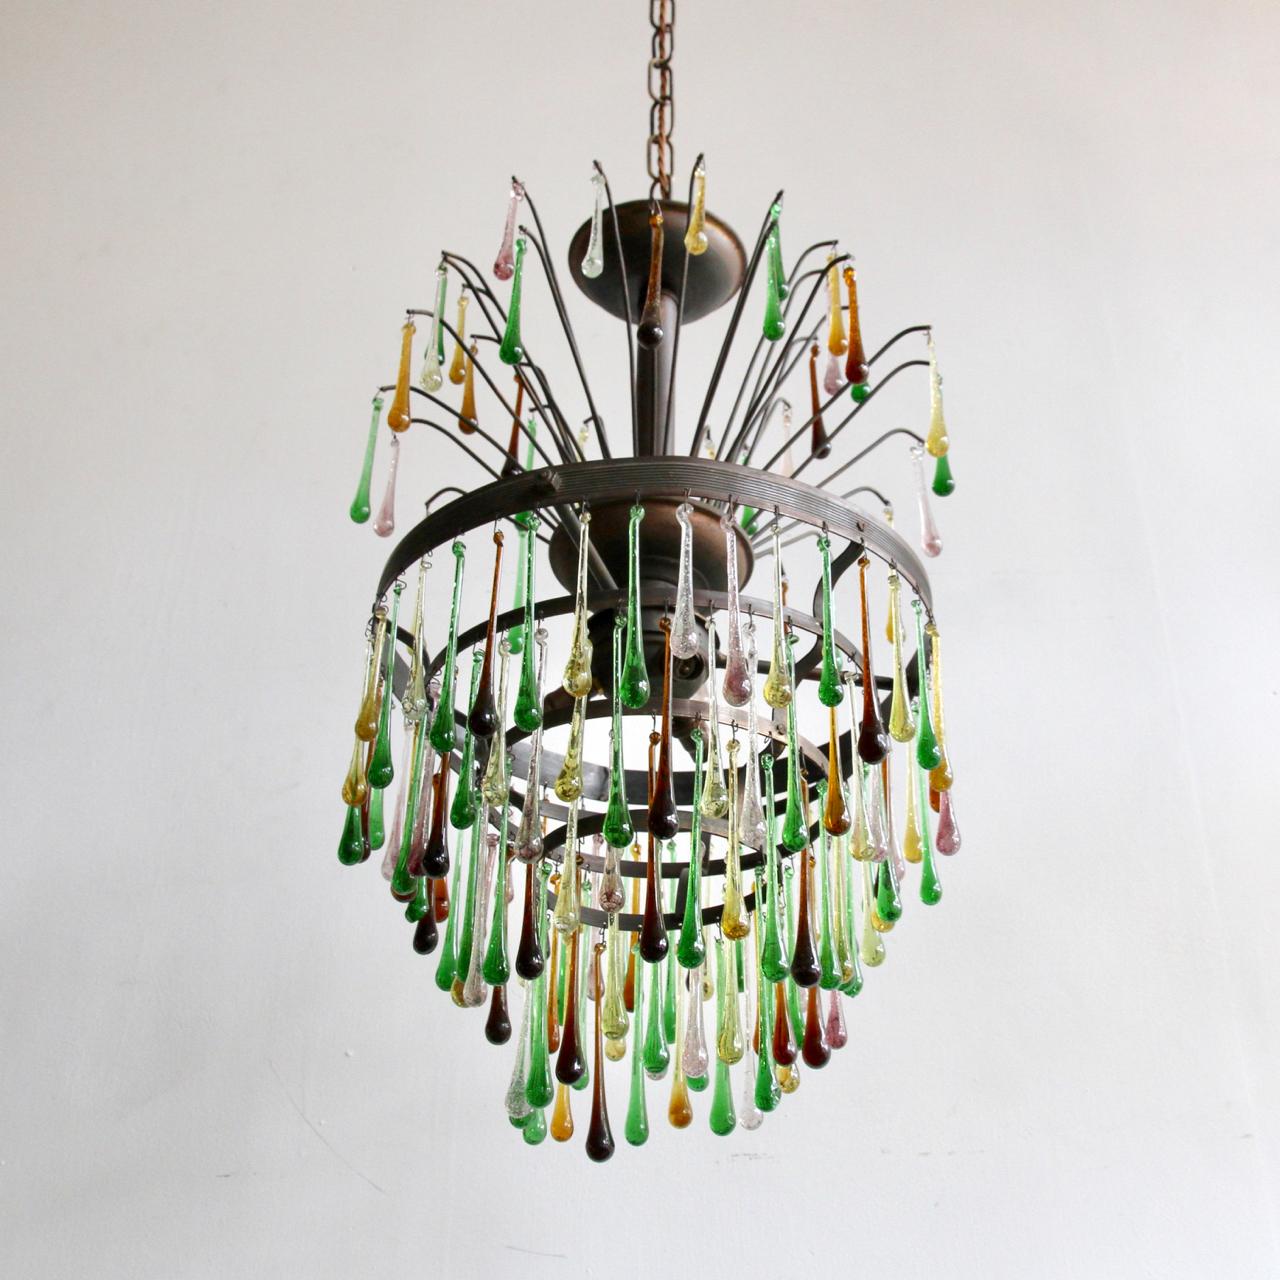 This waterfall chandelier frame originates from early 1900s, France. It has been dressed in contemporary and vintage colored glass teardrops in greens, rich browns, purple with some clear. This chandelier is a unique statement centerpiece which is